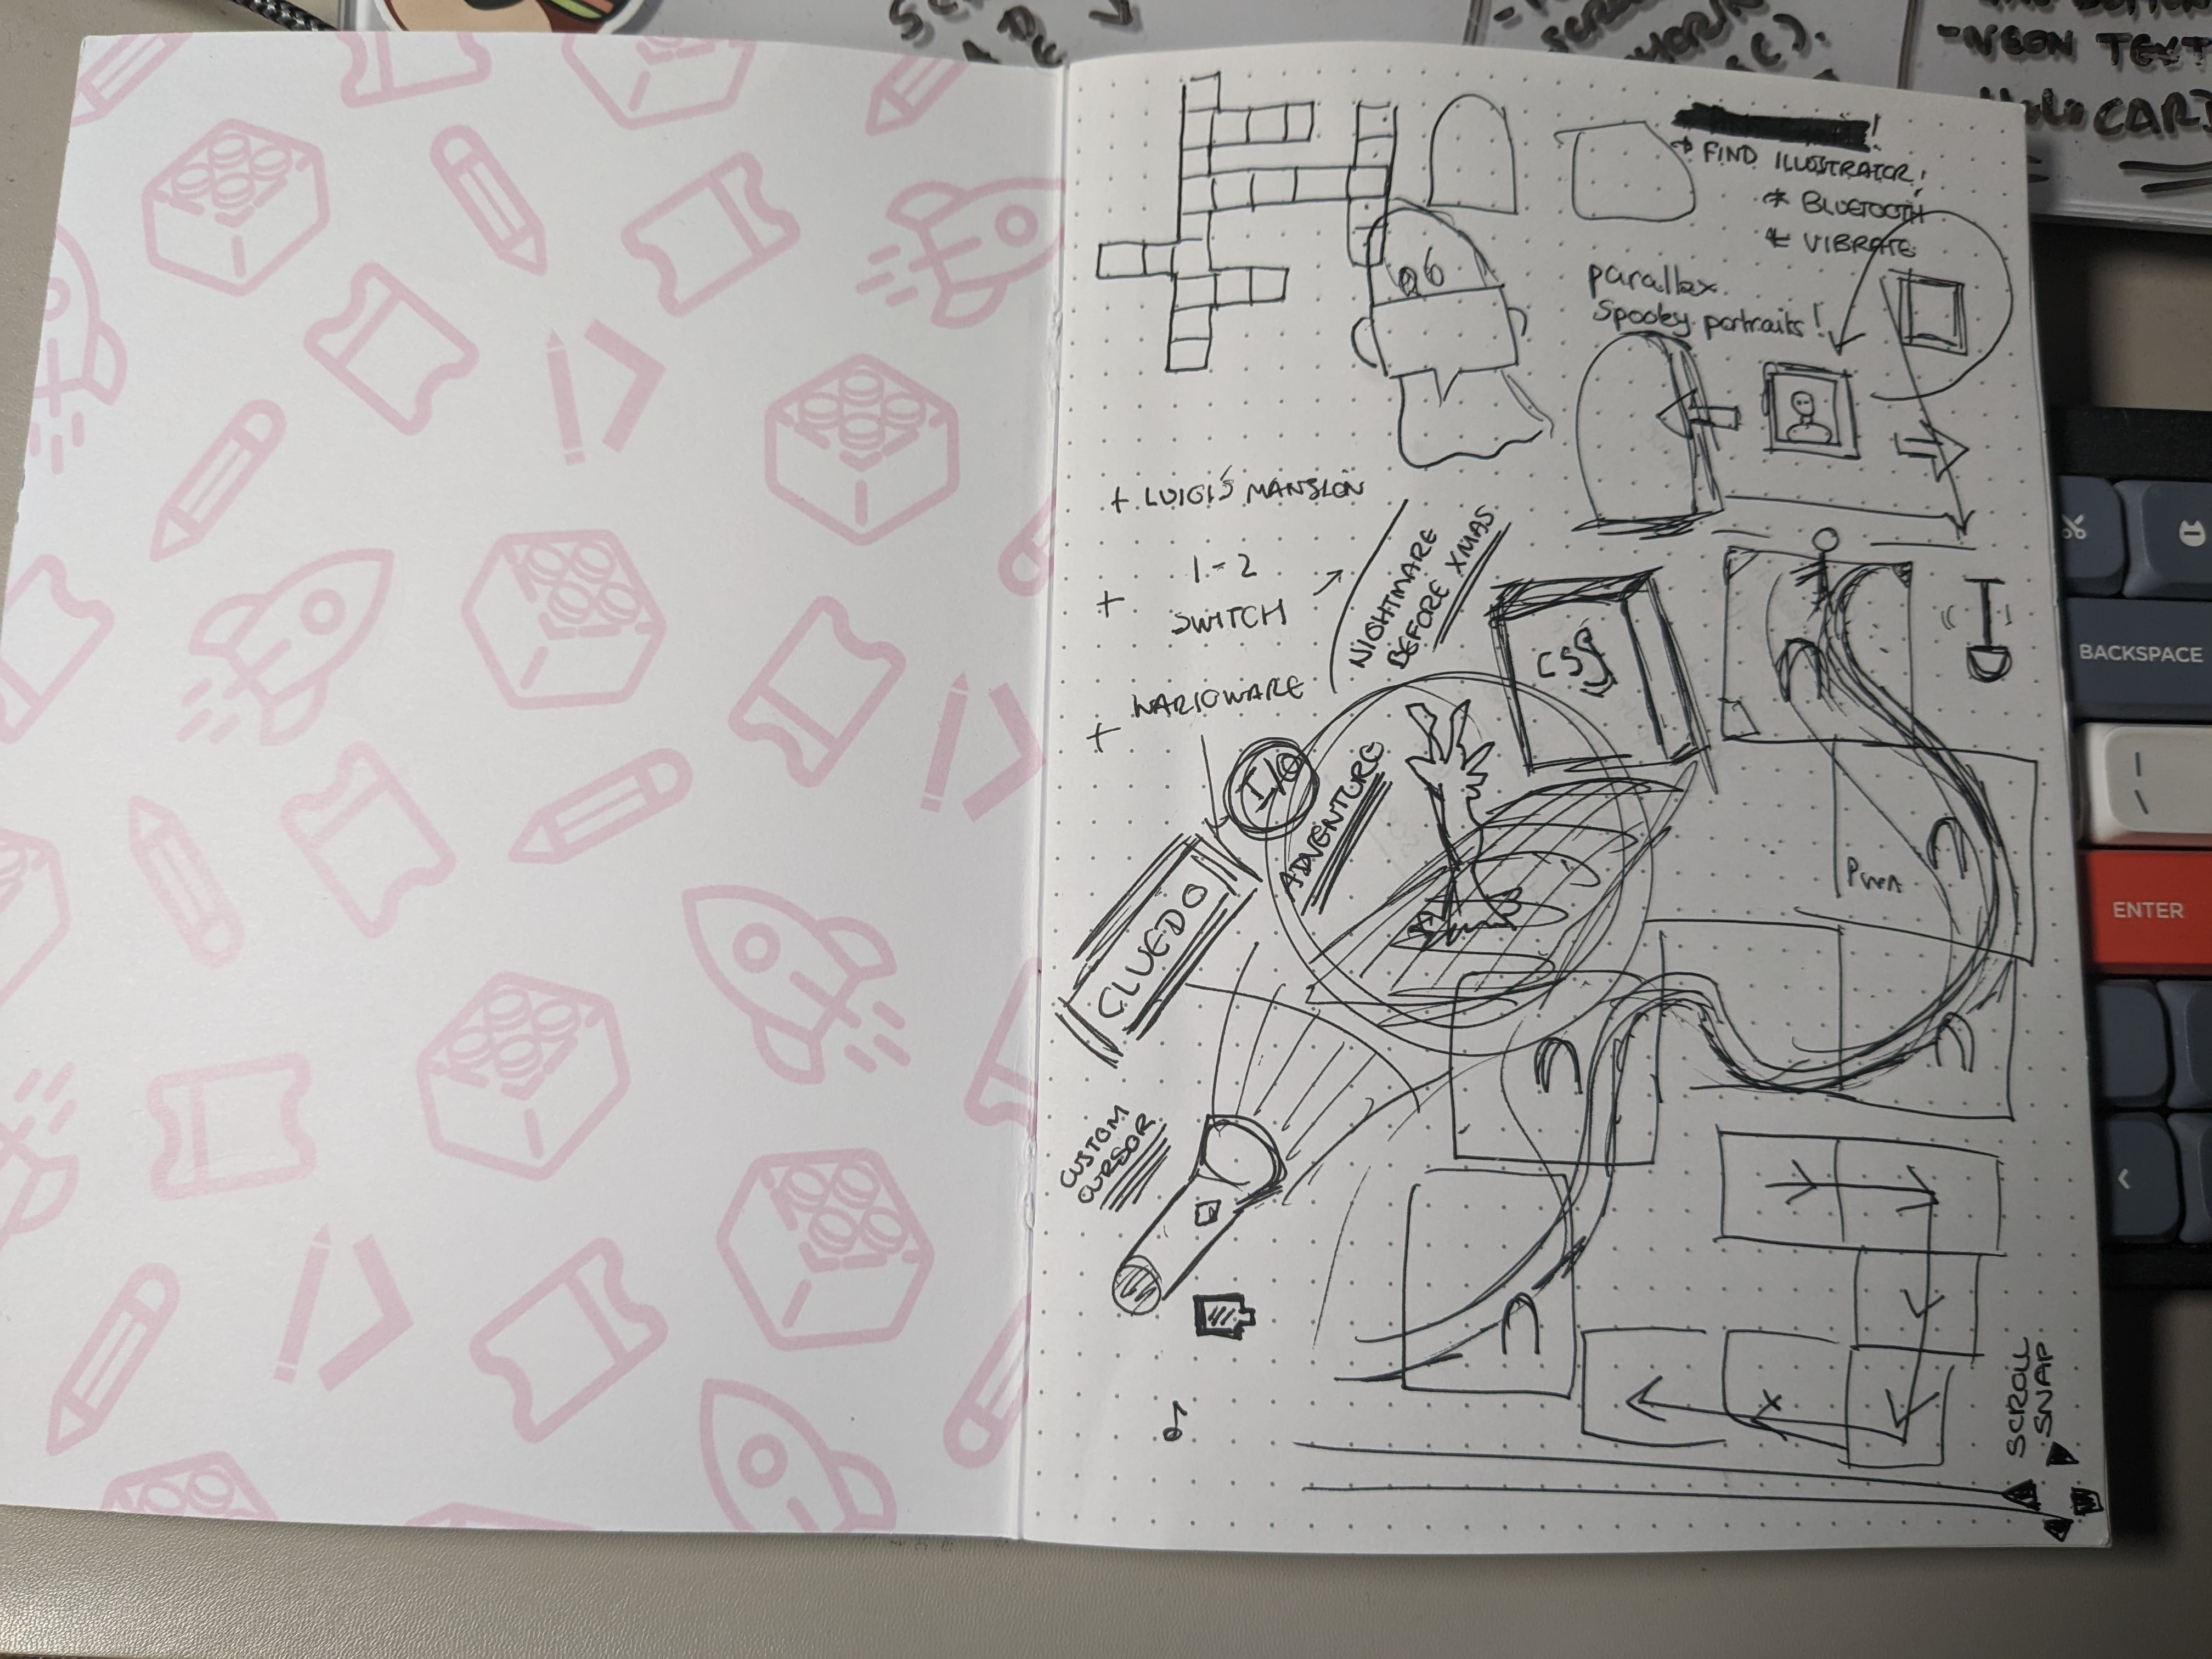 A notebook lies on a desk with various doodles and scribbles related to the project.